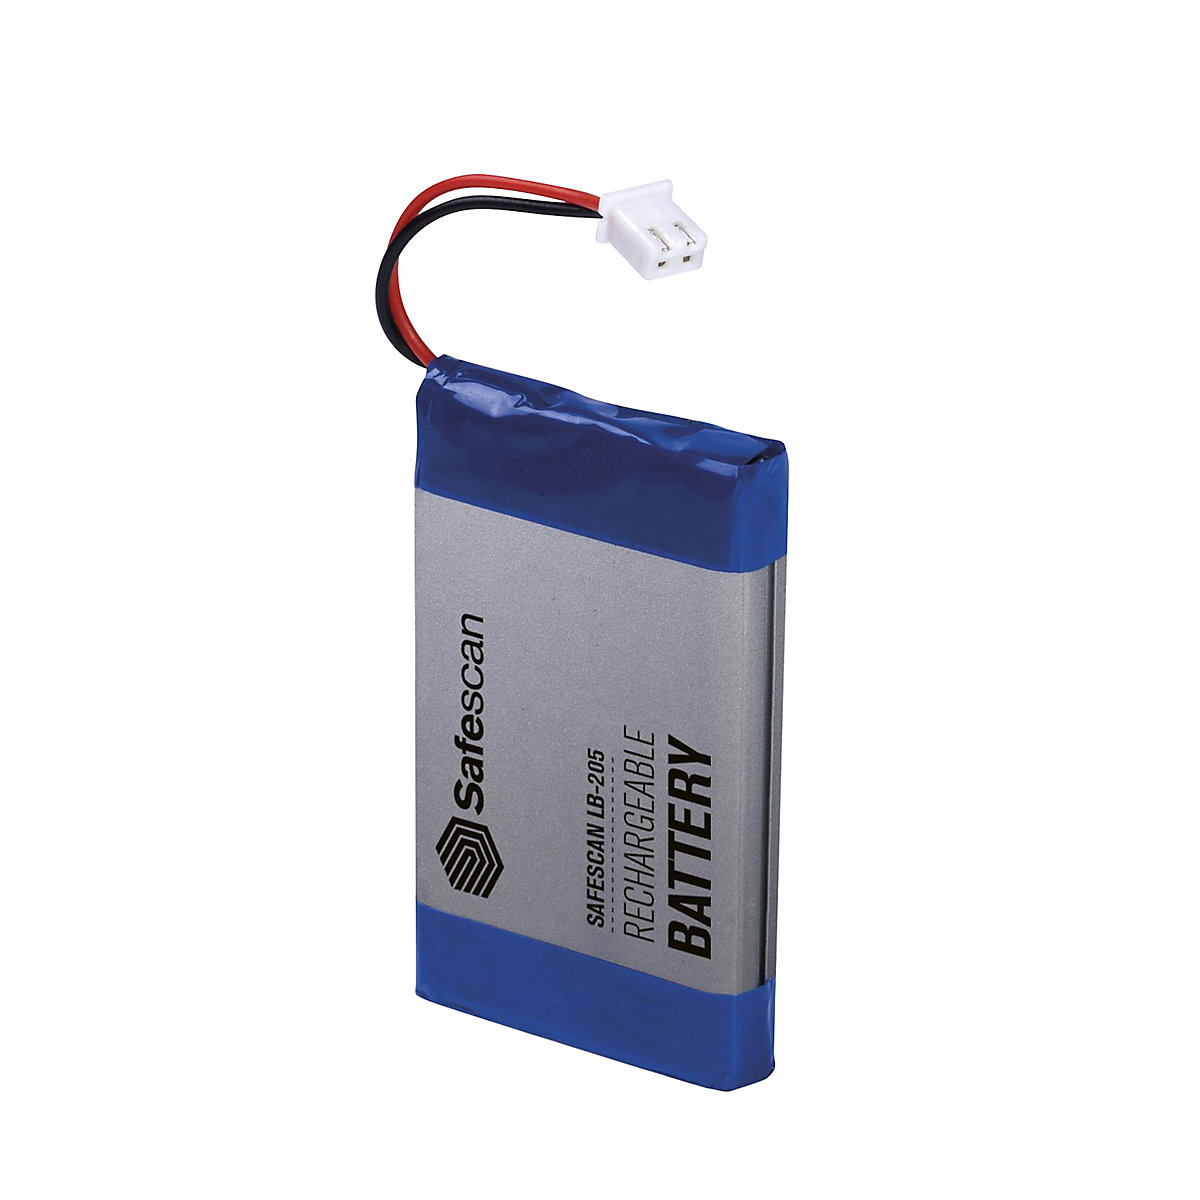 Rechargeable battery – Safescan